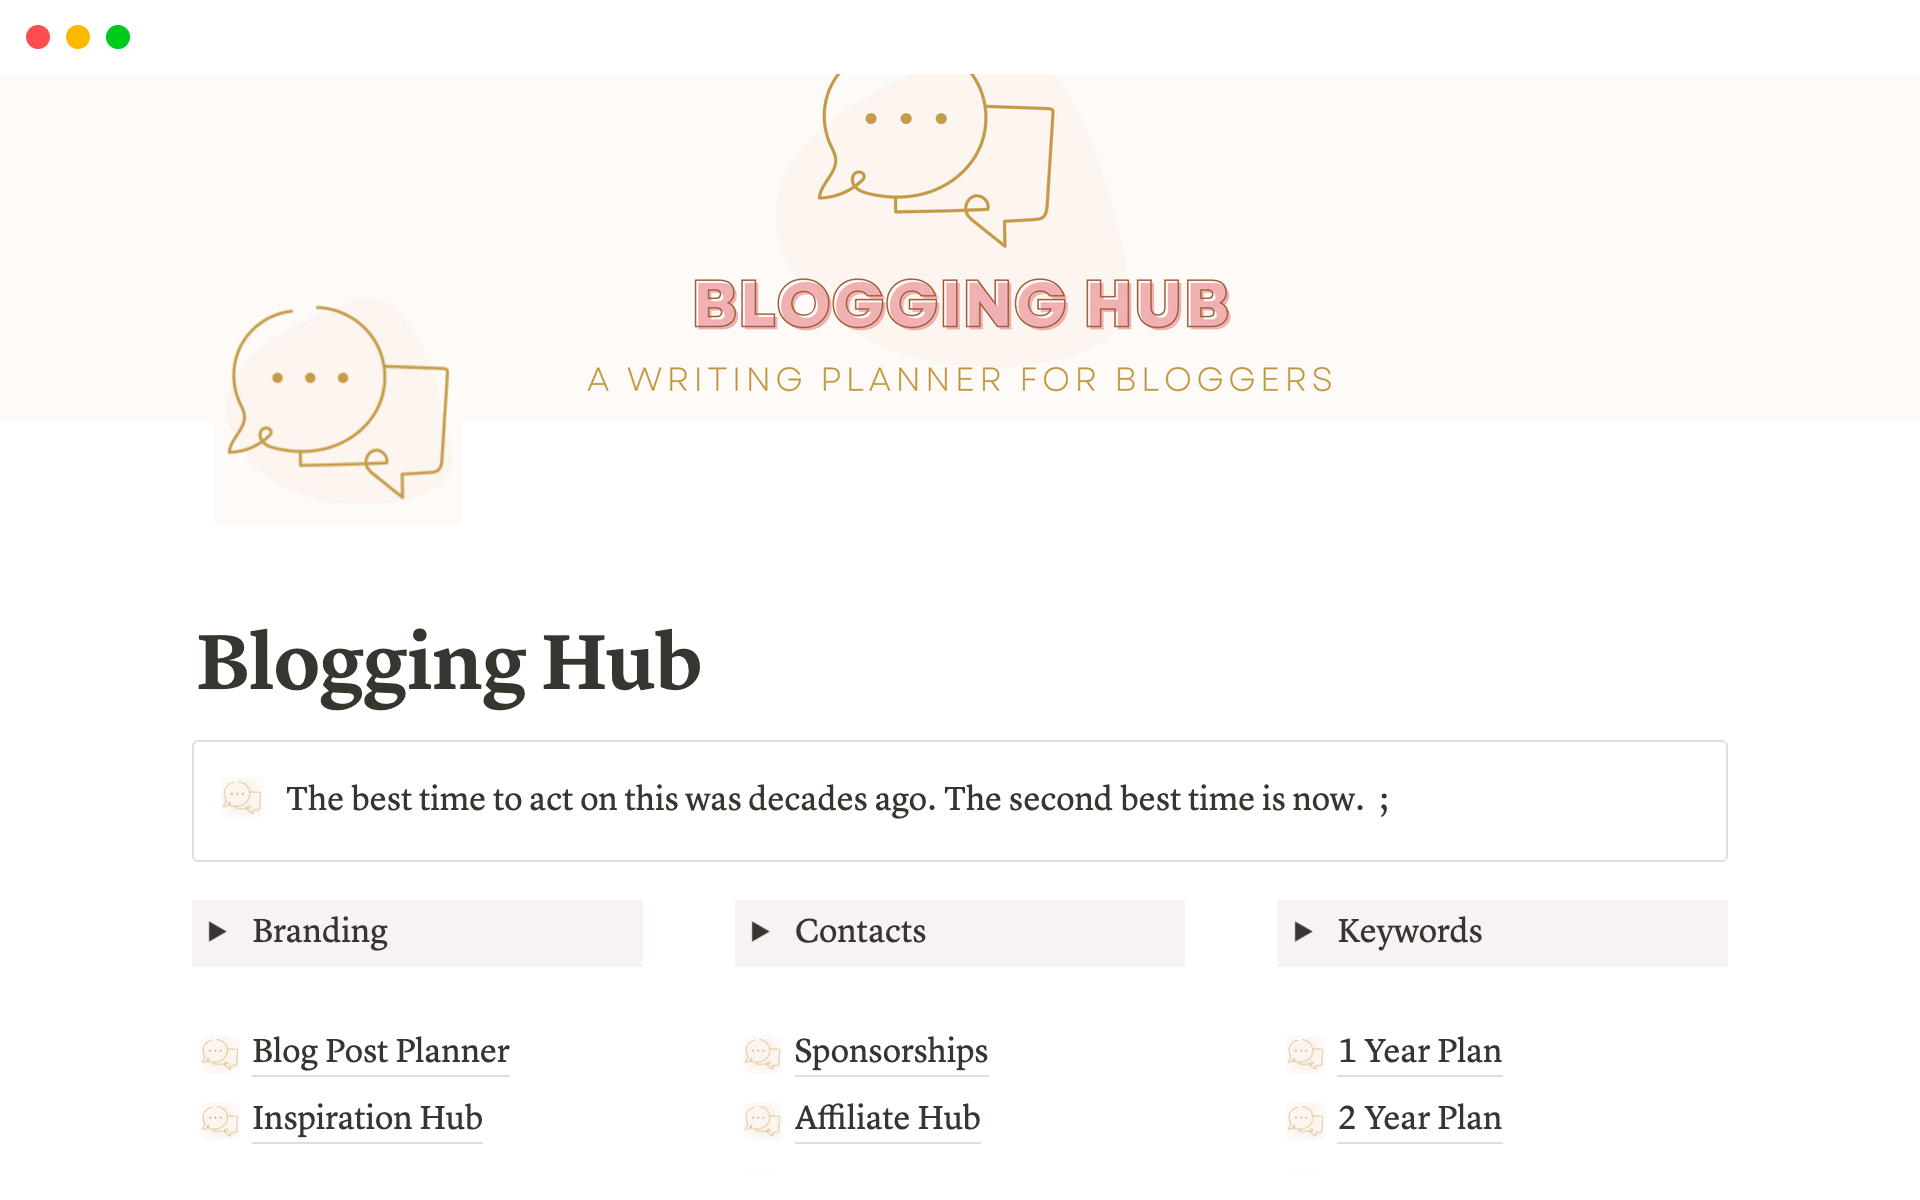 Blog planning so bloggers can stay organized, keep all information in one place, write their posts, and keep a schedule.  Perfect second brain for Bloggers.